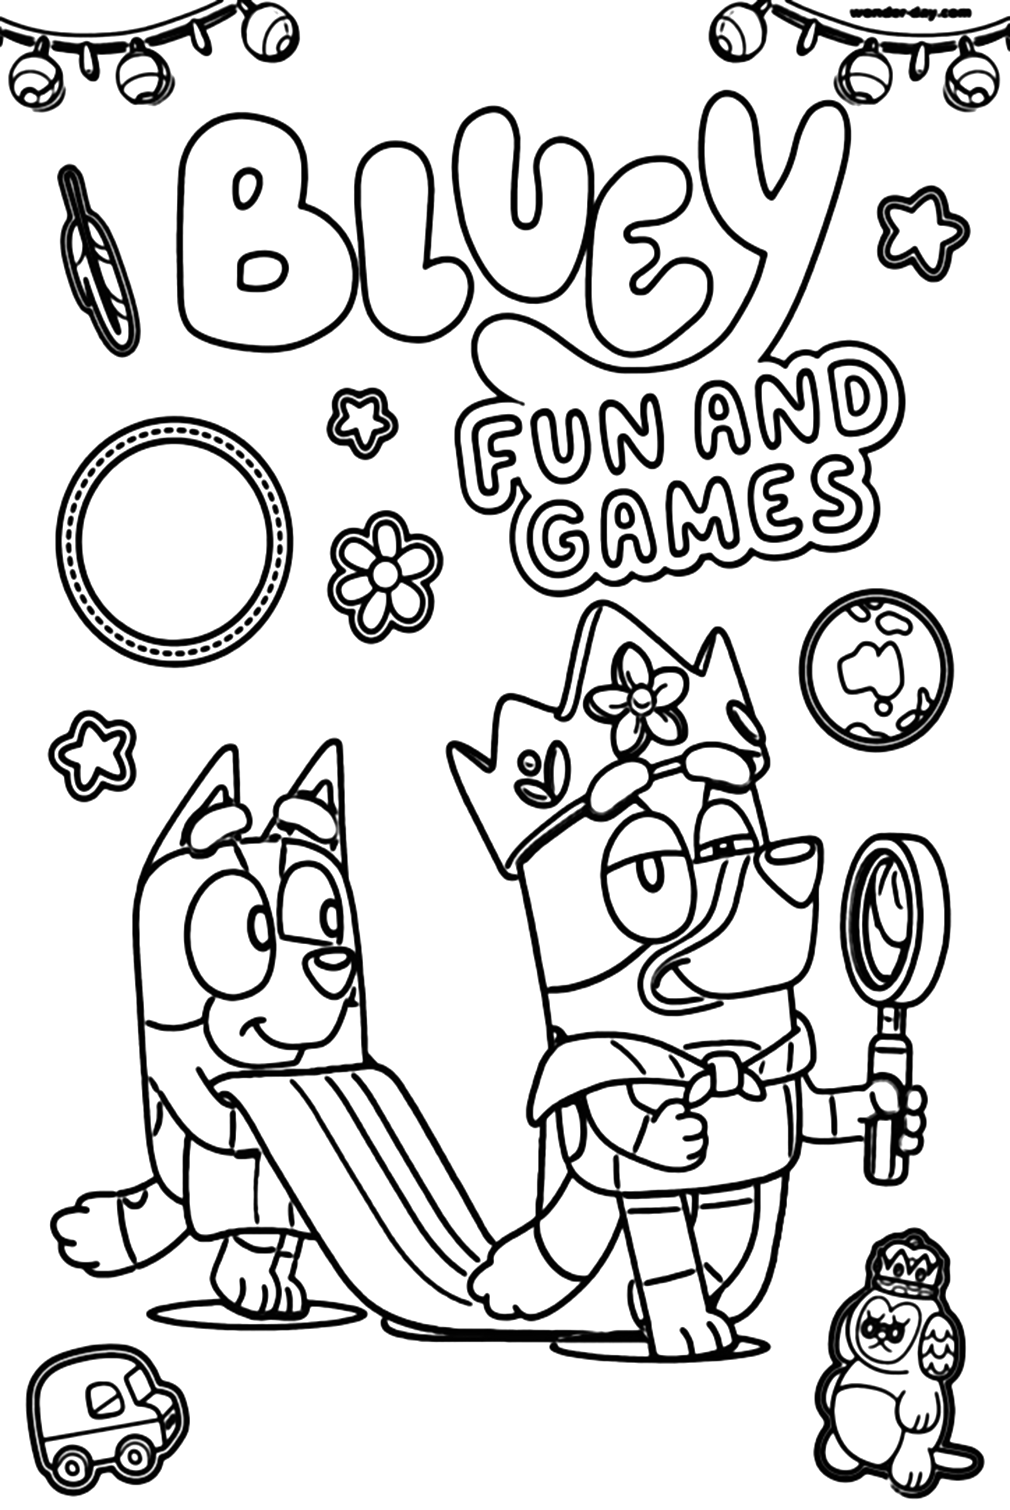 Royal Dogs Coloring Pages